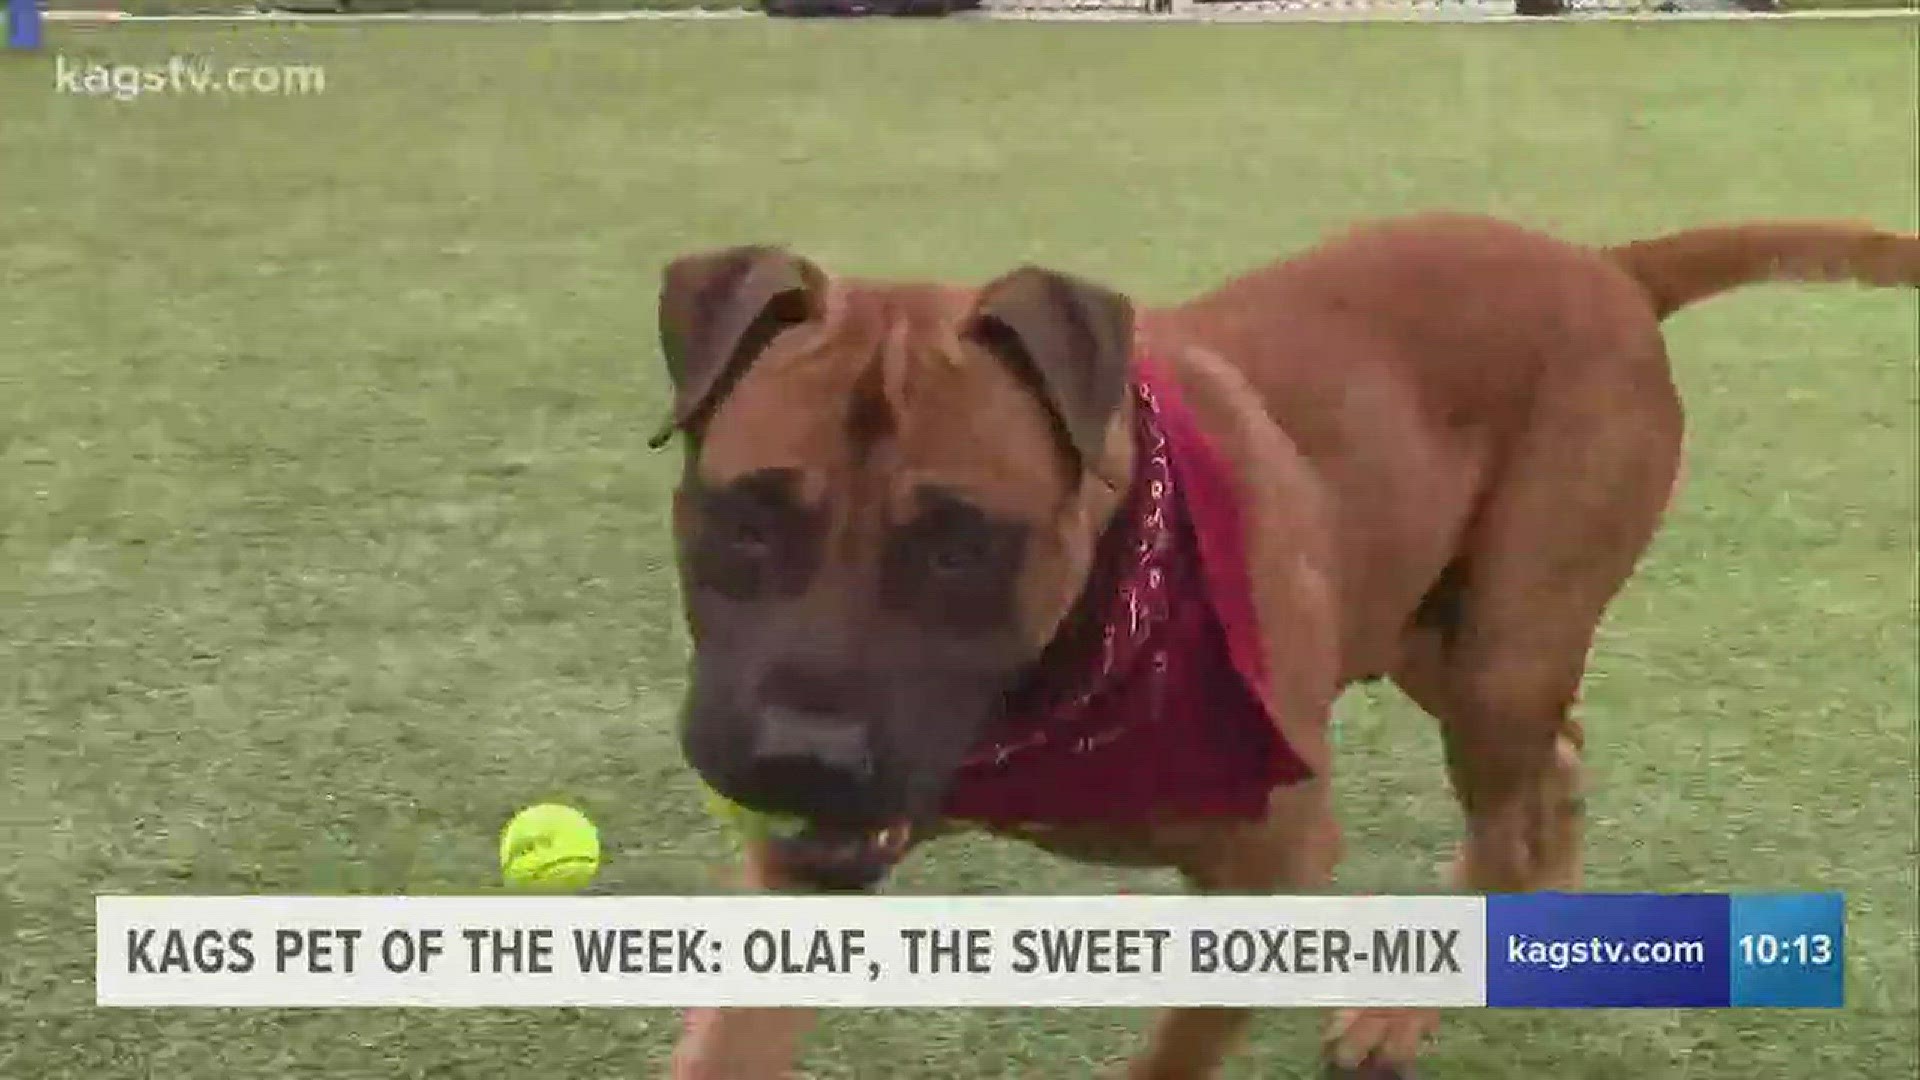 For this week's pet showcase we take a look at Olaf, a 4-year-old boxer mix from the Bryan Animal Shelter.